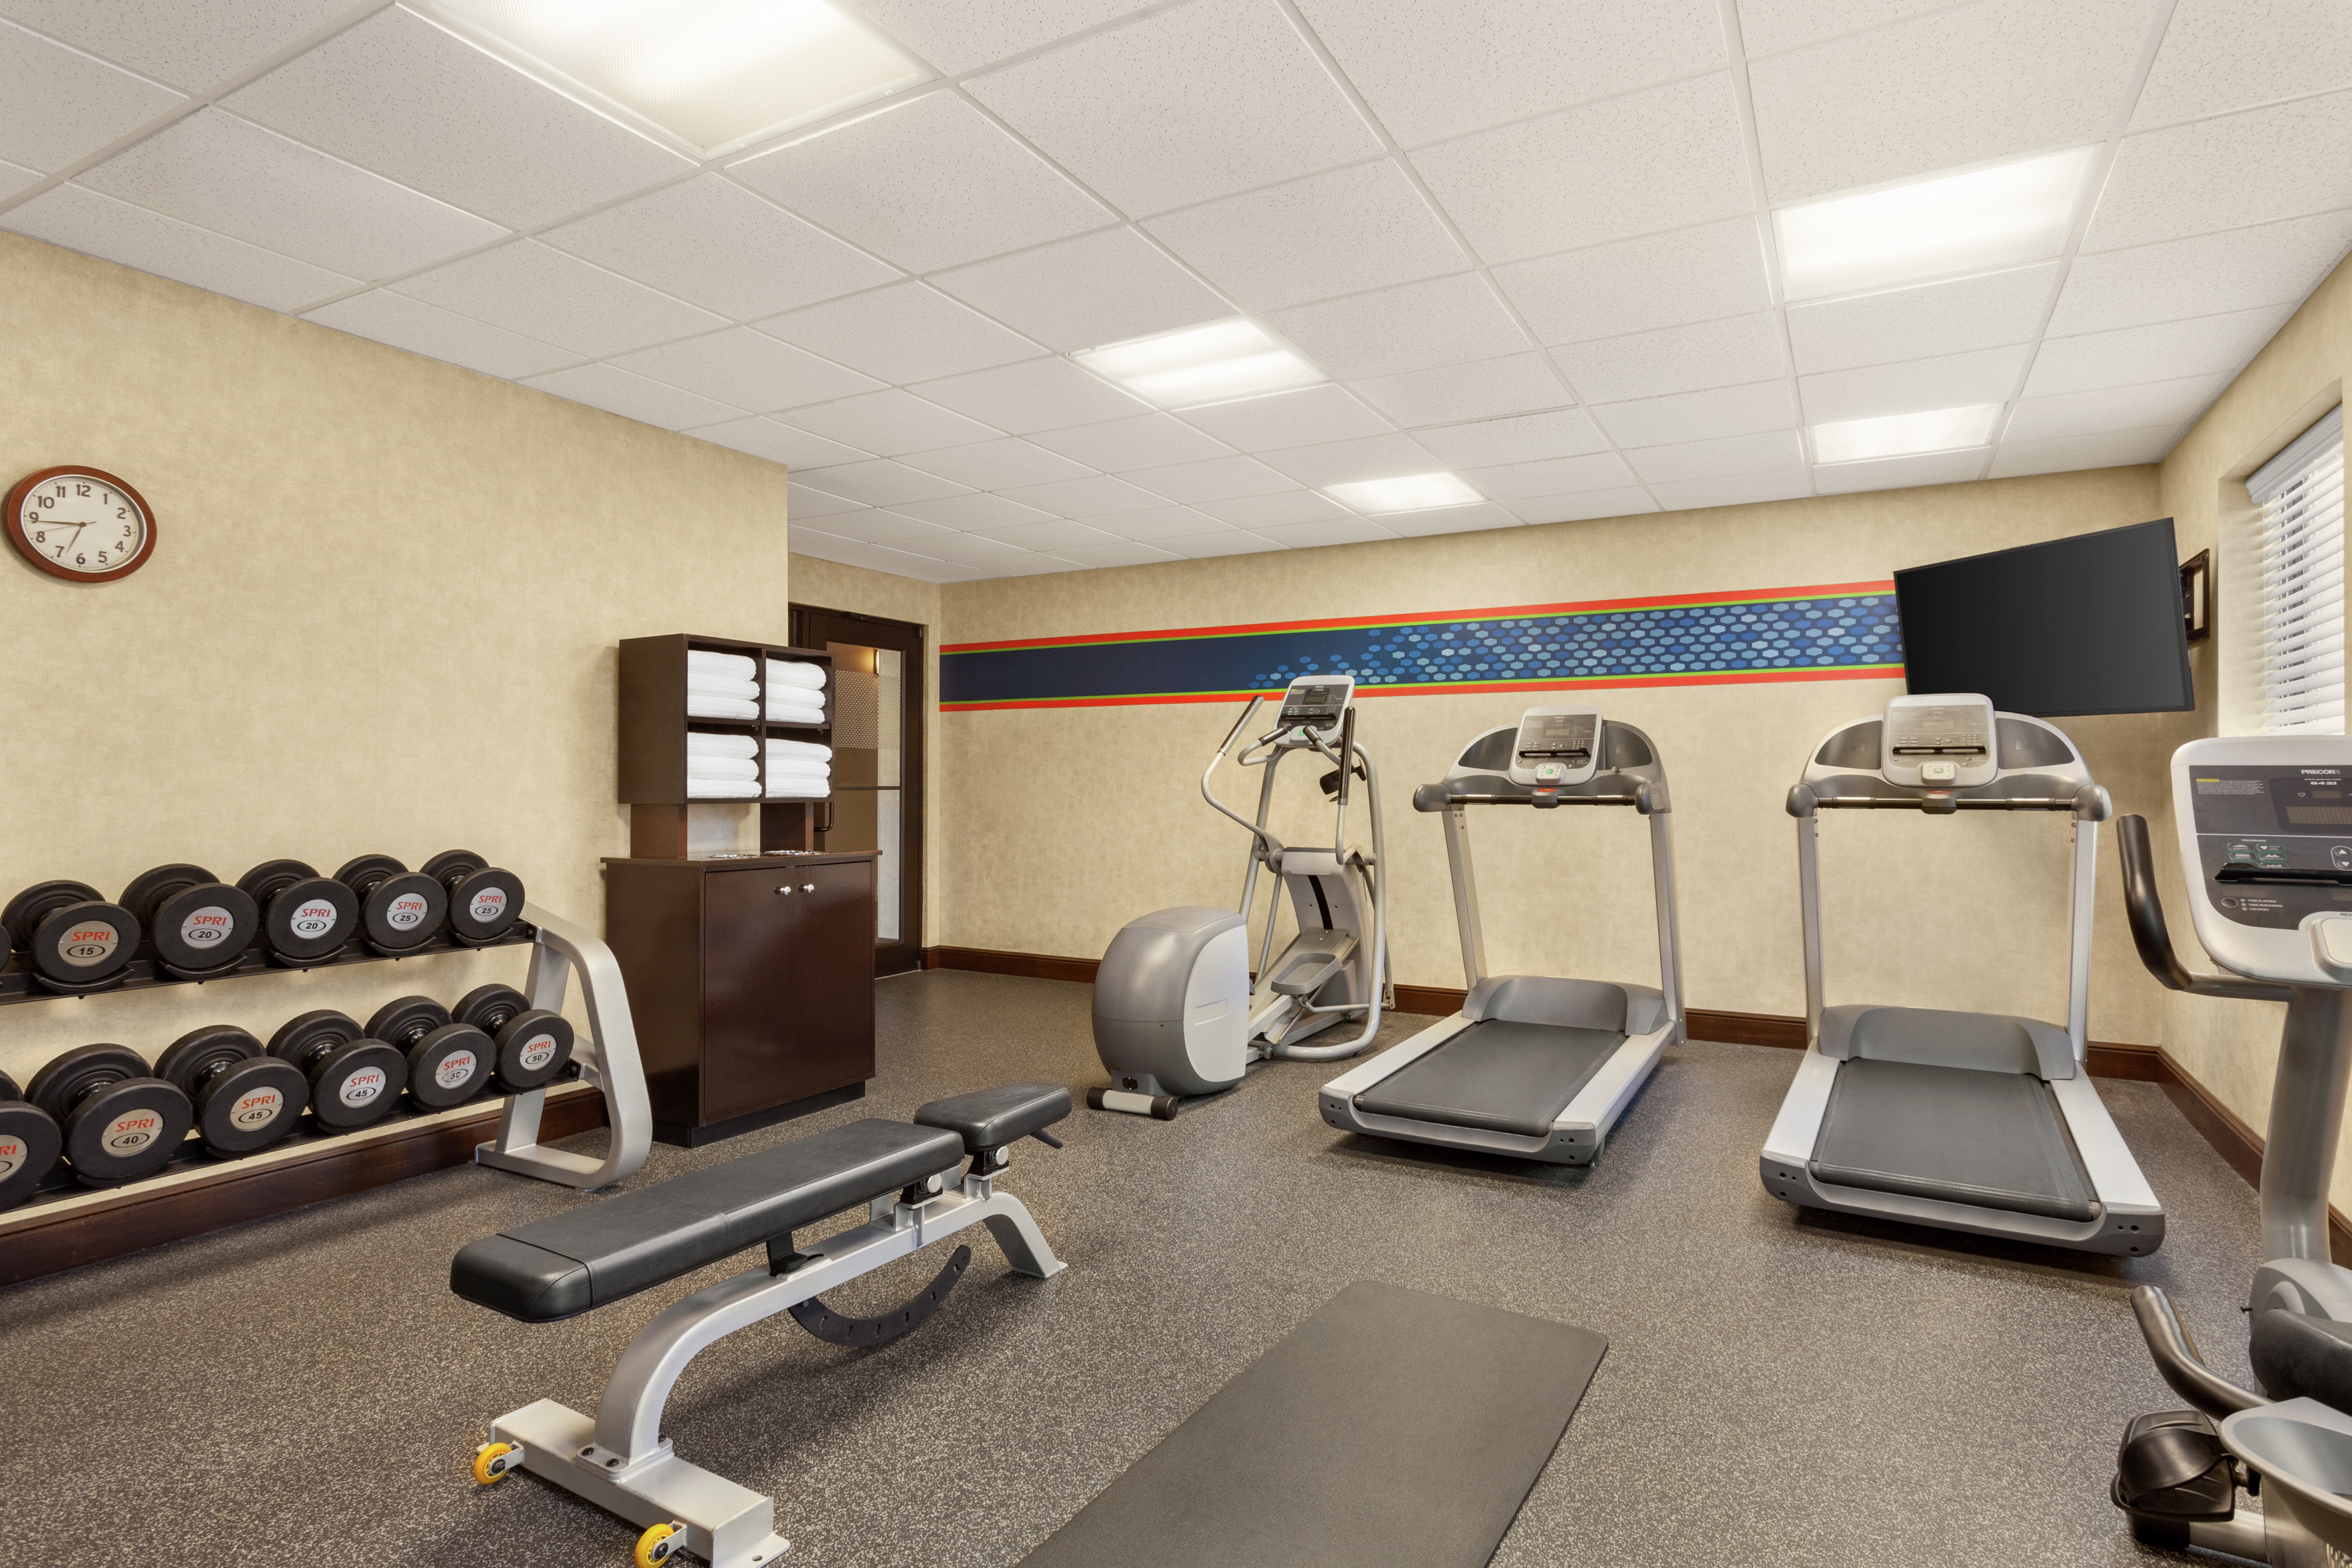 Convenient on-site fitness center featuring cardio machines, free weights, and TV.